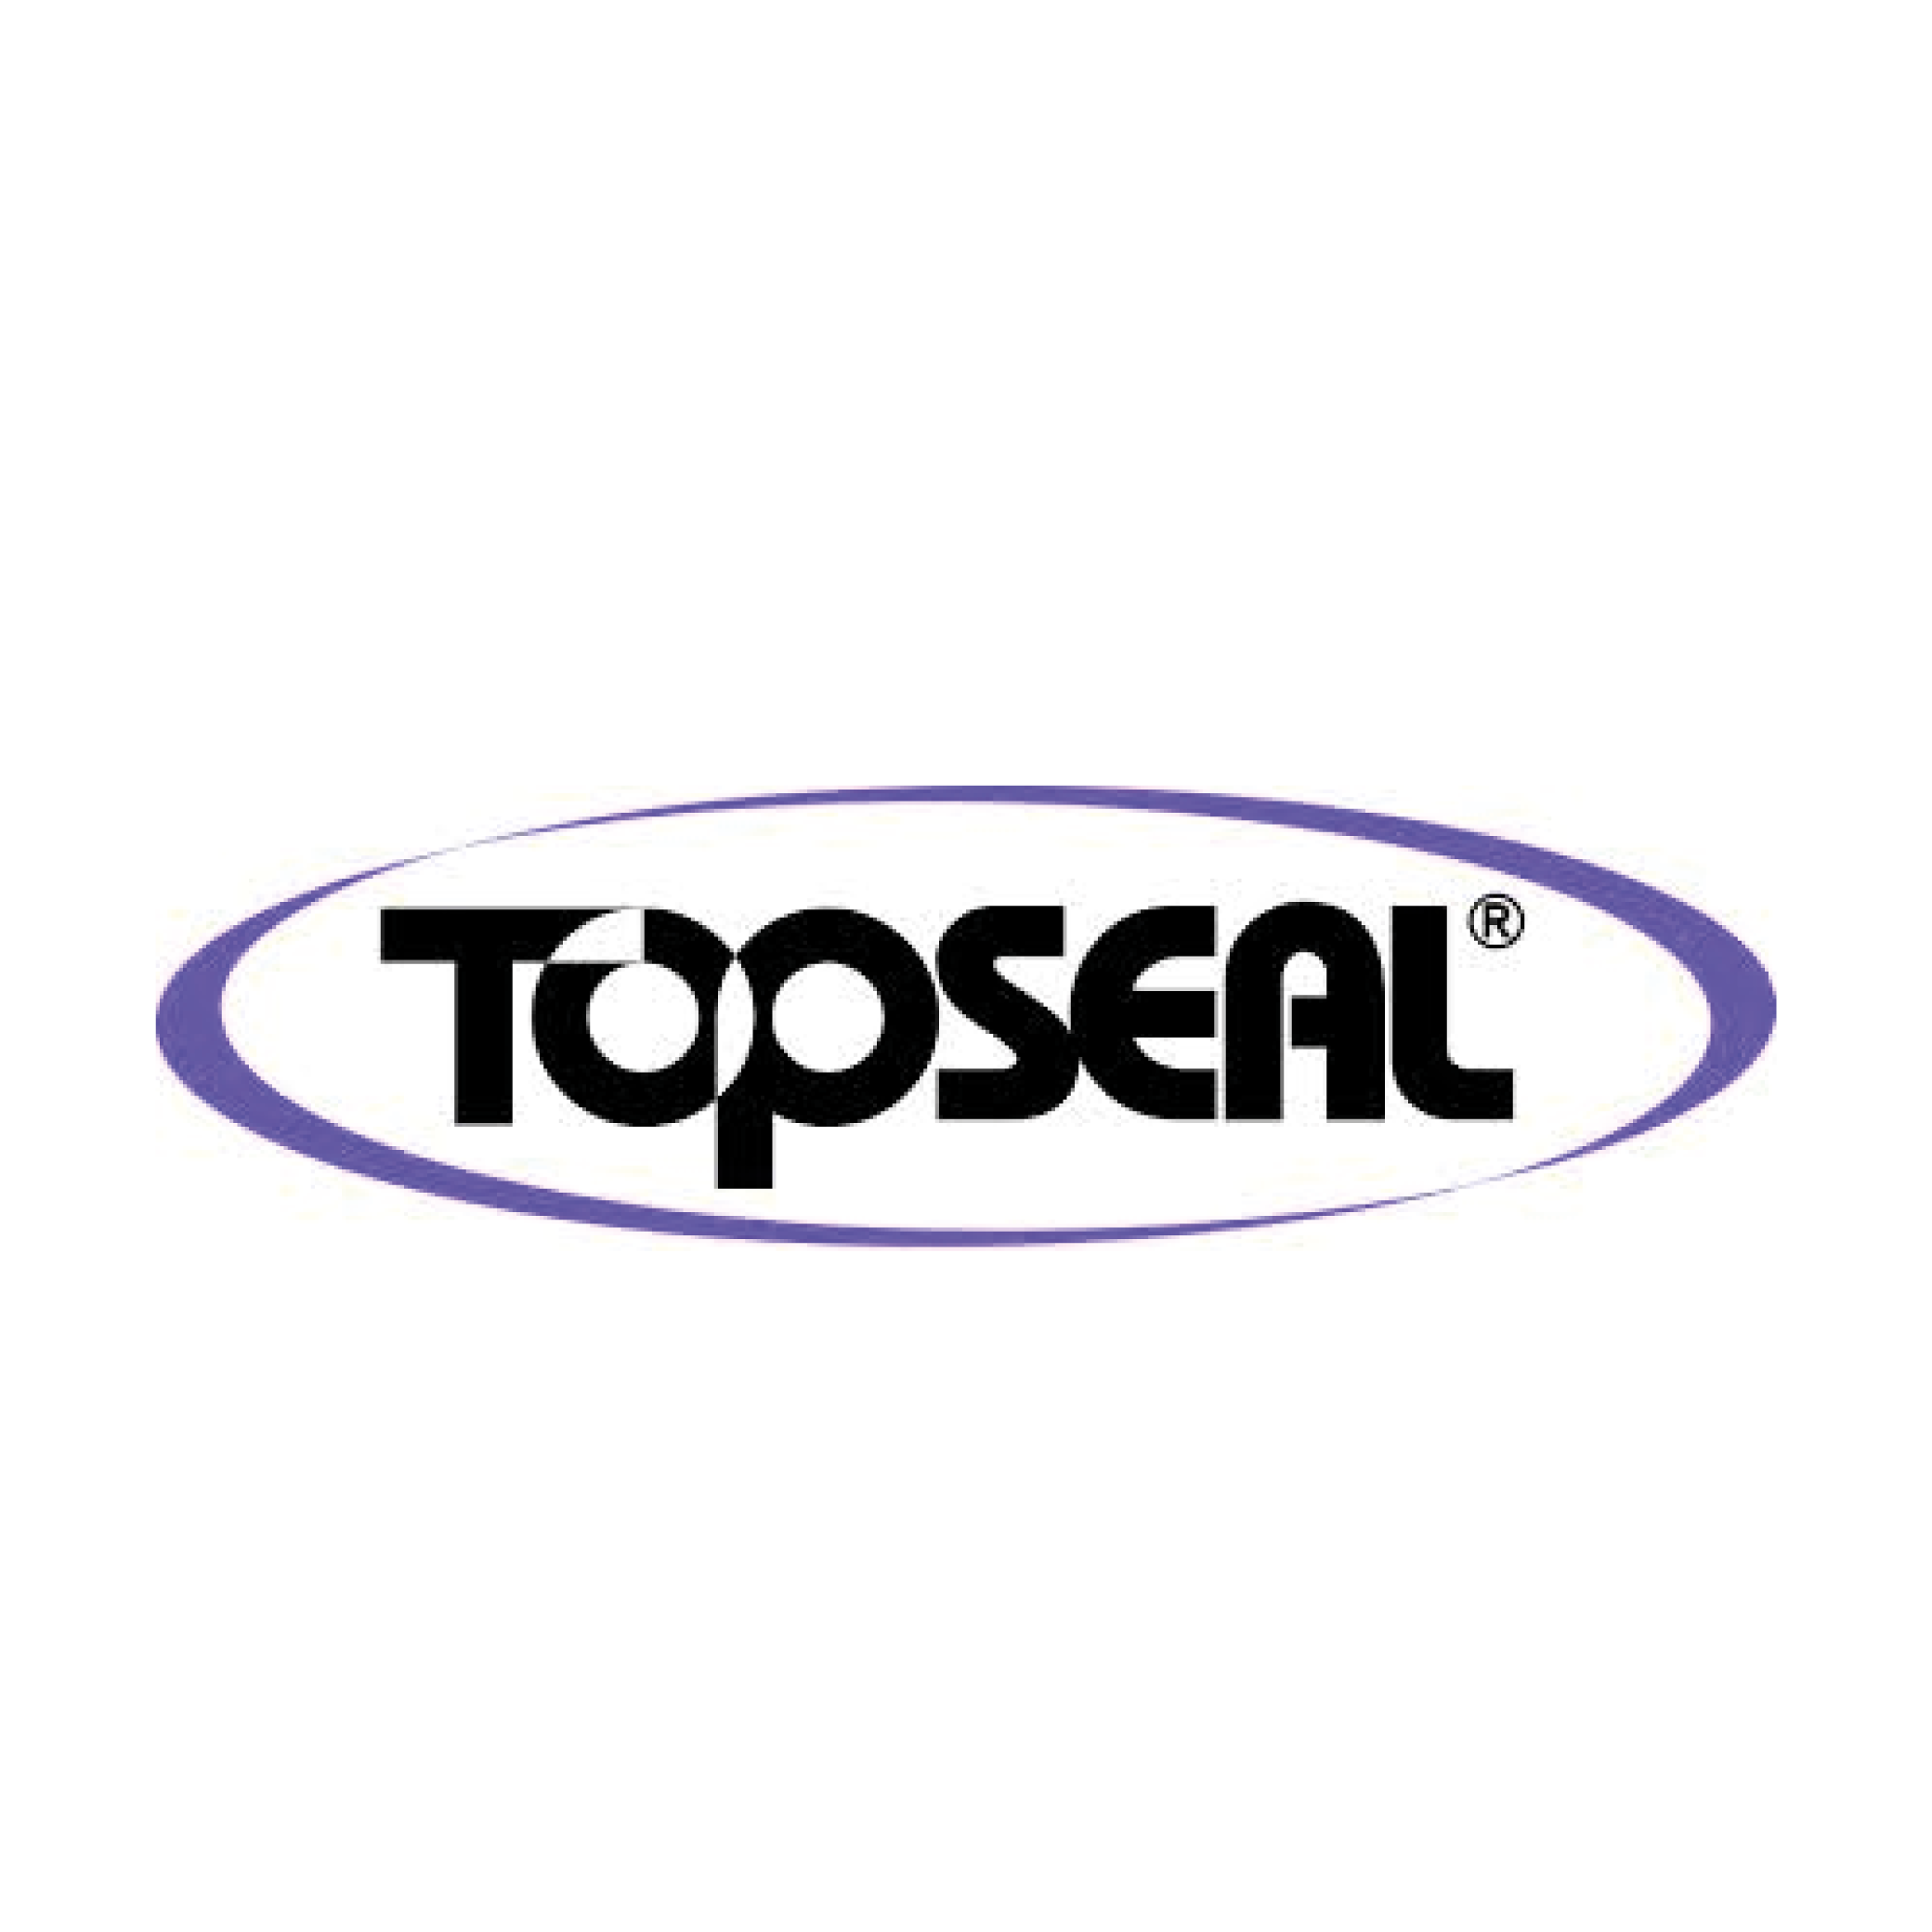 topseal